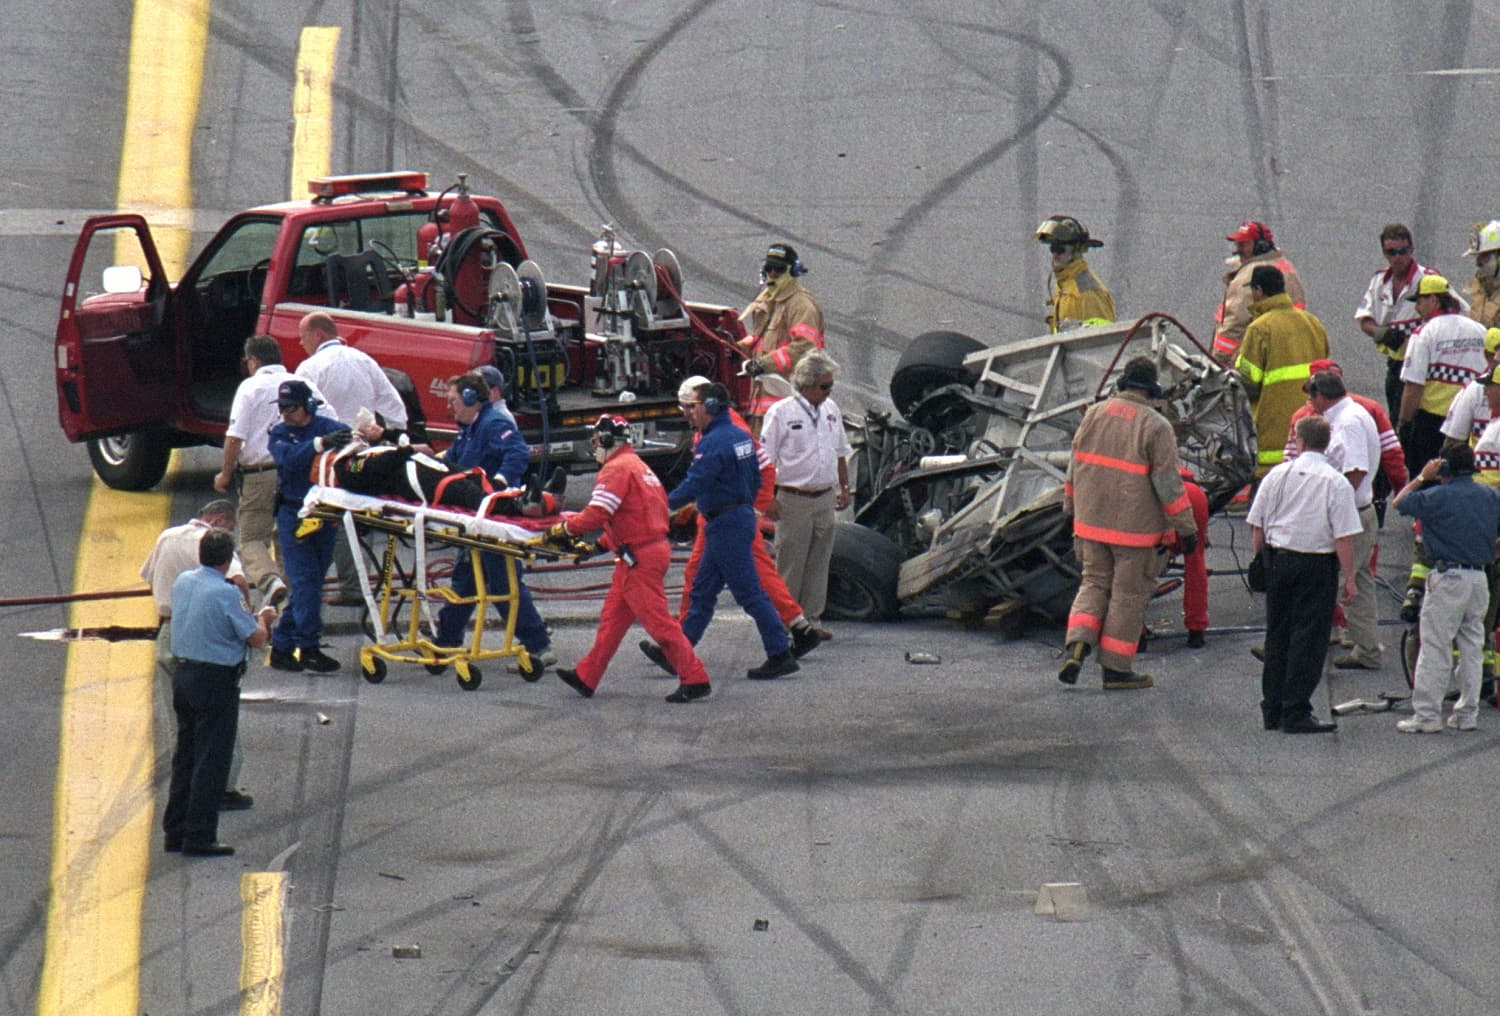 A view of the aftermath of Geoffrey Bodine's accident during the Craftsman Truck Series in the Daytona 250.